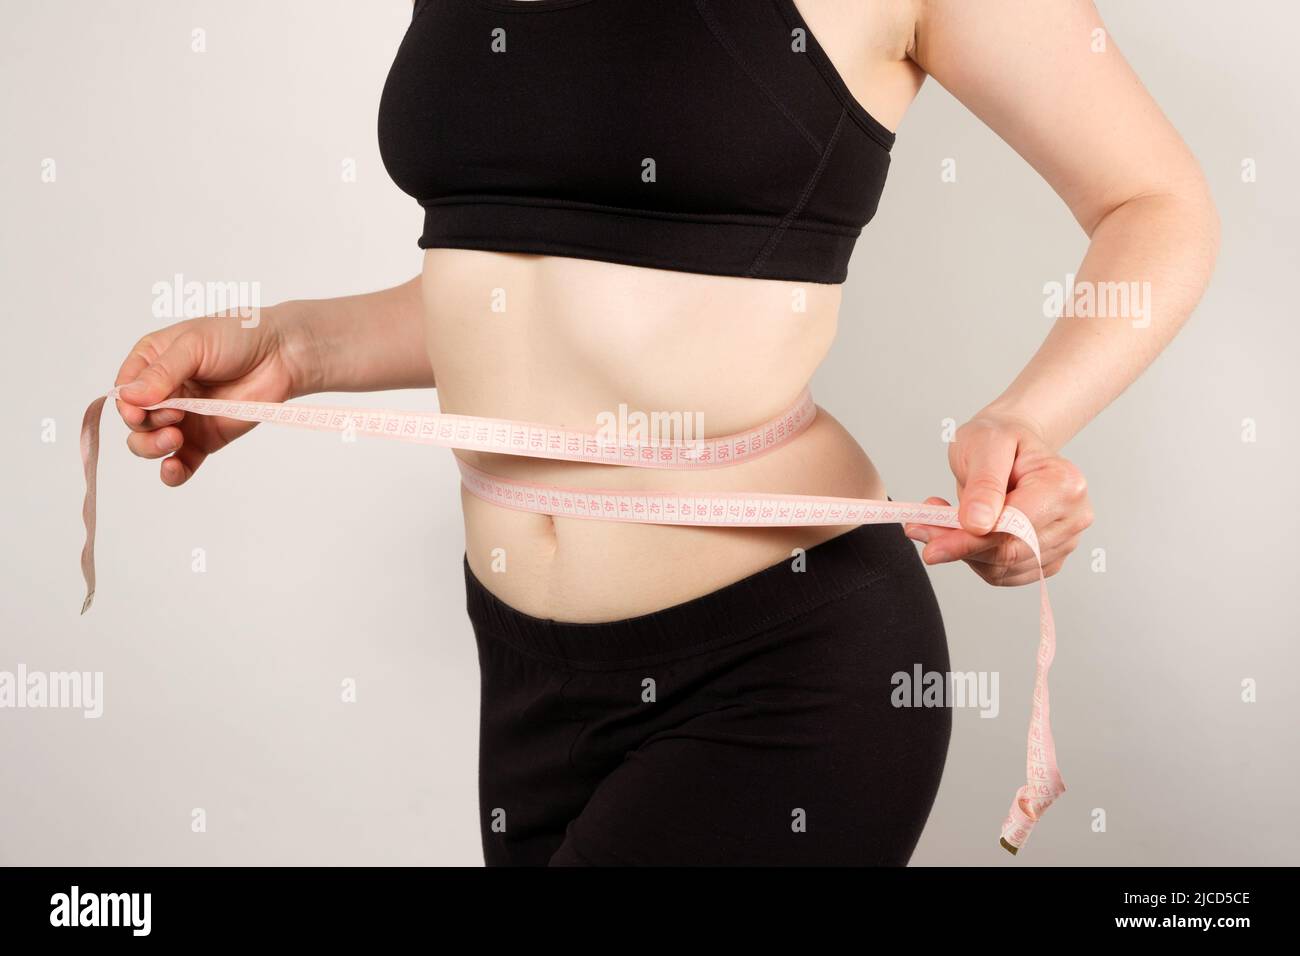 https://c8.alamy.com/comp/2JCD5CE/a-woman-measures-the-circumference-of-the-abdomen-with-a-centimeter-tape-close-up-slimming-concept-2JCD5CE.jpg